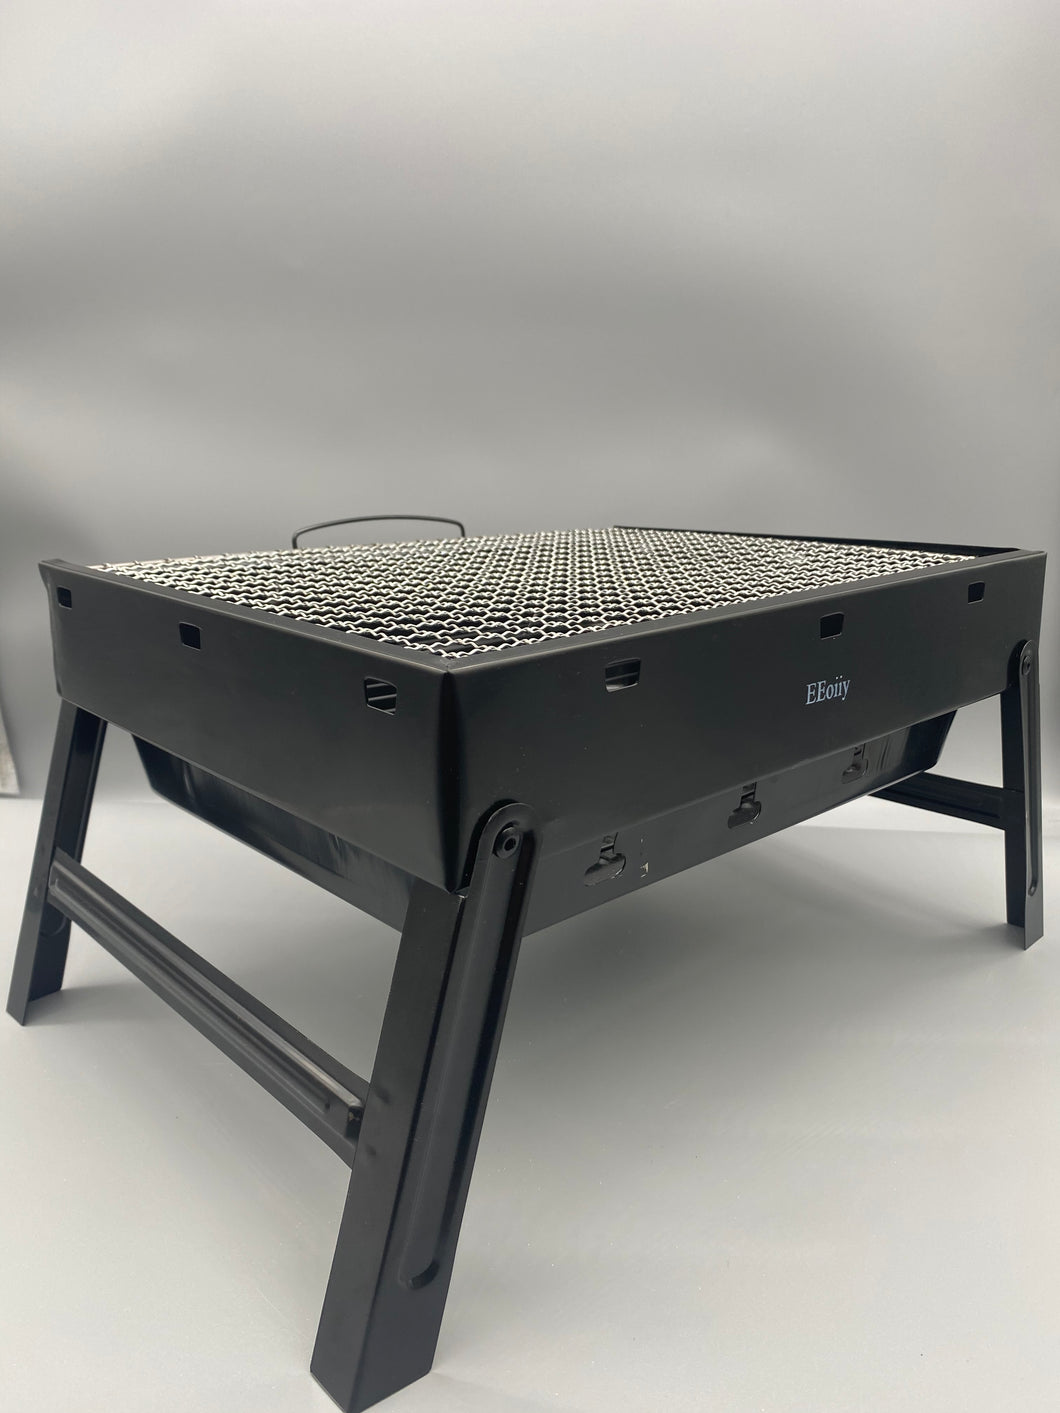 EEoiiy Barbecues and grills,propane and gas fired barbecues, stoves, and grills,Small folding grill for travel, outdoor cooking and barbecue, camping barbecue, picnic yard.